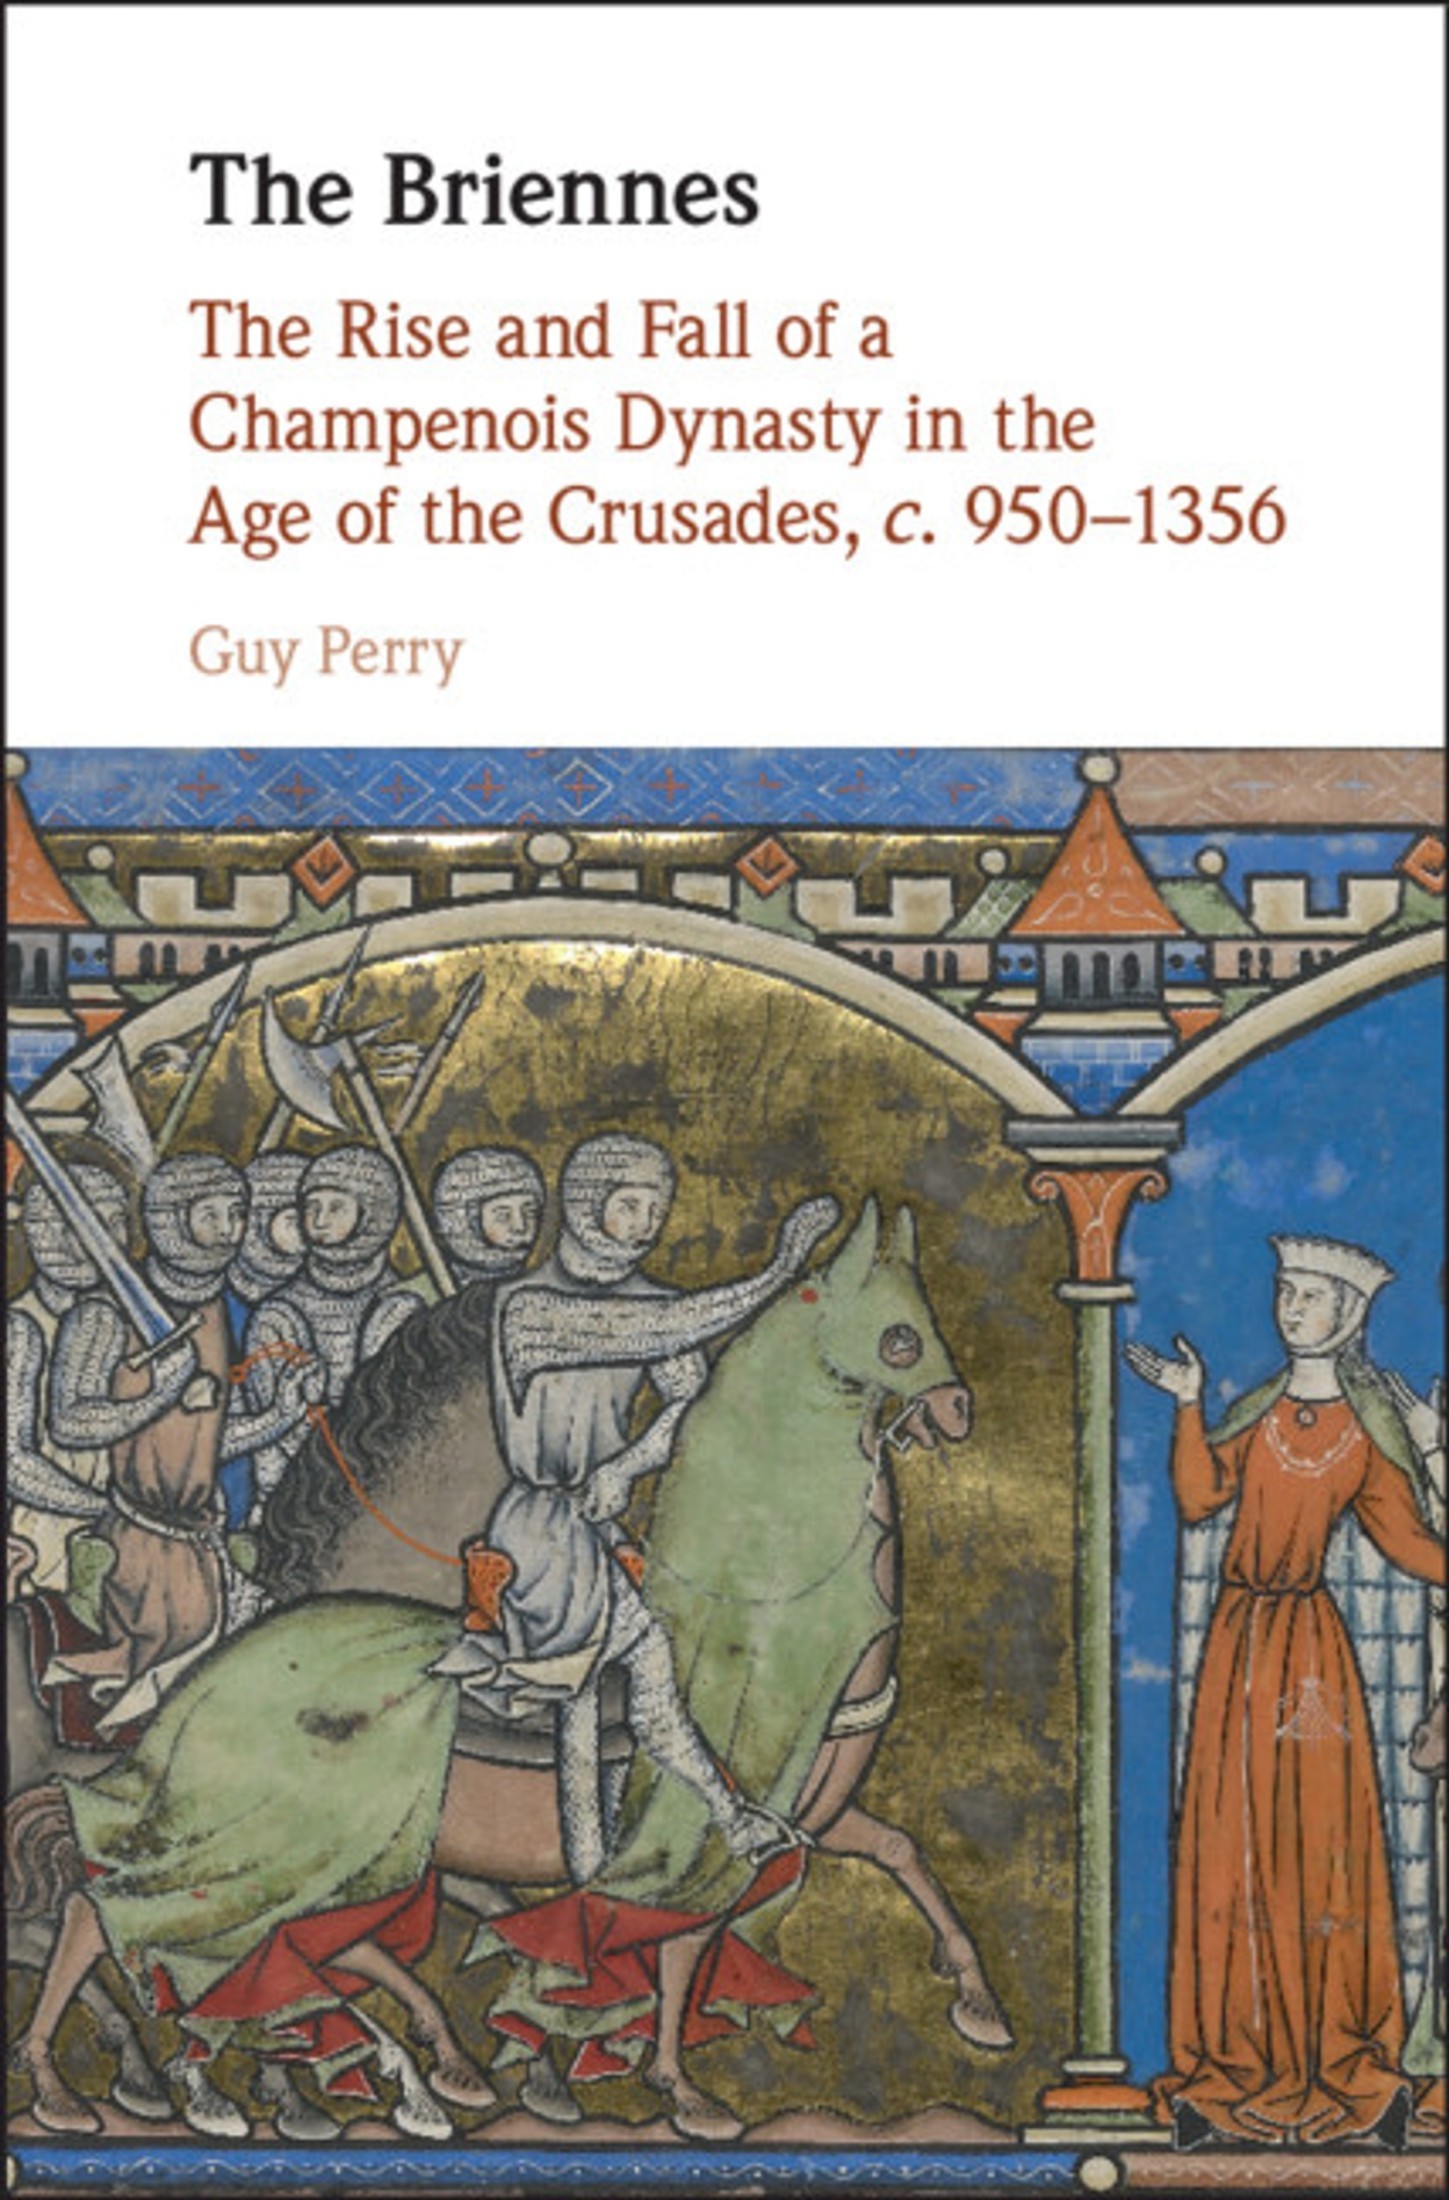 The Briennes: The Rise and Fall of a Champenois Dynasty in the Age of the Crusades, C. 950–1356